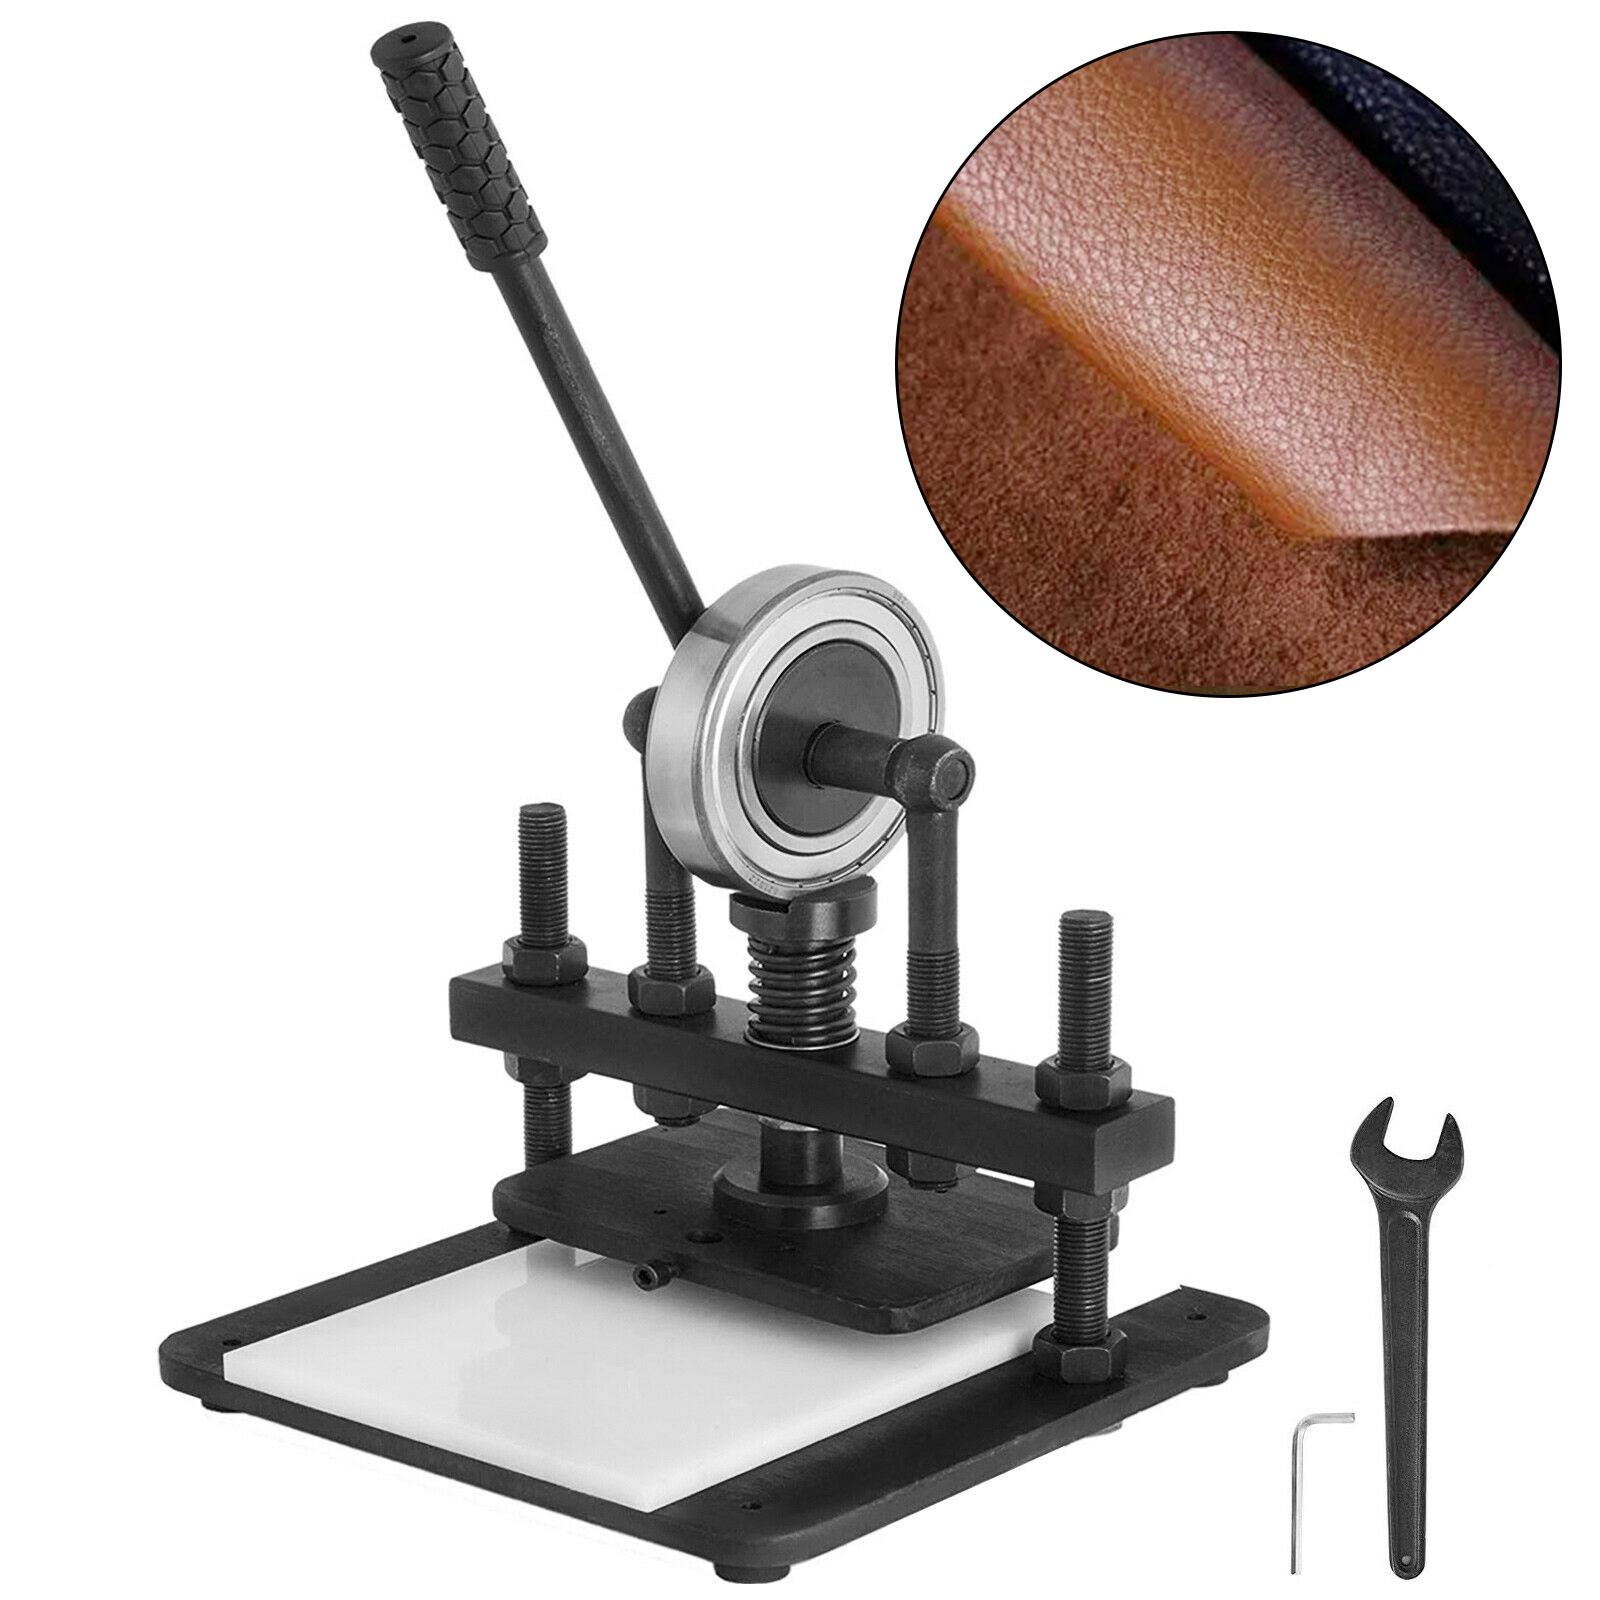 Leather Cutting Tool for Die Cutting Machine Supplier China - Wholesale  Price - Ponse Machinery